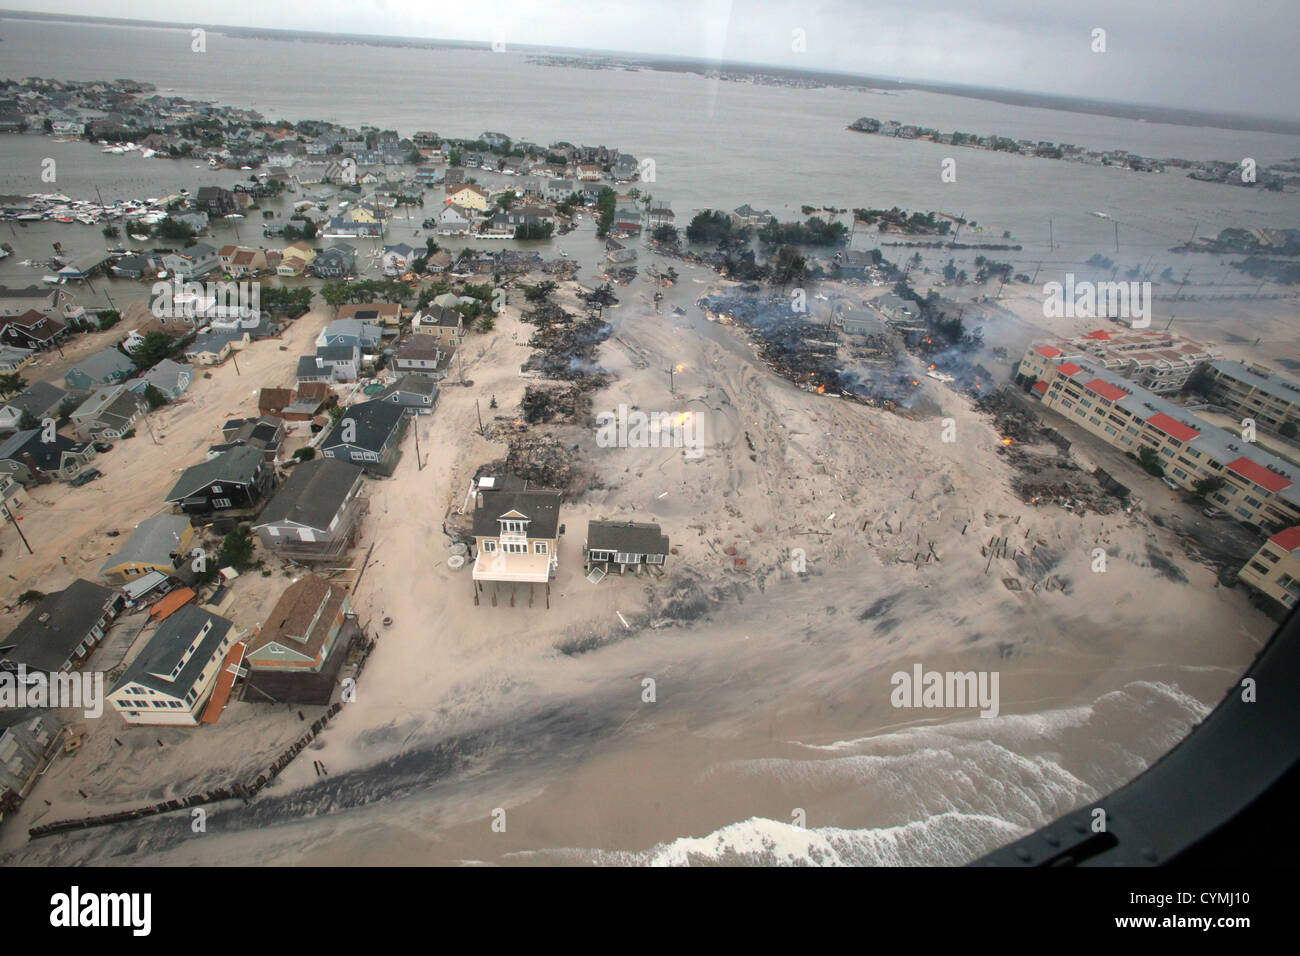 Aerial views of the damage caused by Hurricane Sandy to the New Jersey coast taken during a search and rescue mission by 1-150 Assault Helicopter Battalion, New Jersey Army National Guard, Oct. 30, 2012. (U.S. Air Force photo by Master Sgt. Mark C. Olsen/Released) Stock Photo